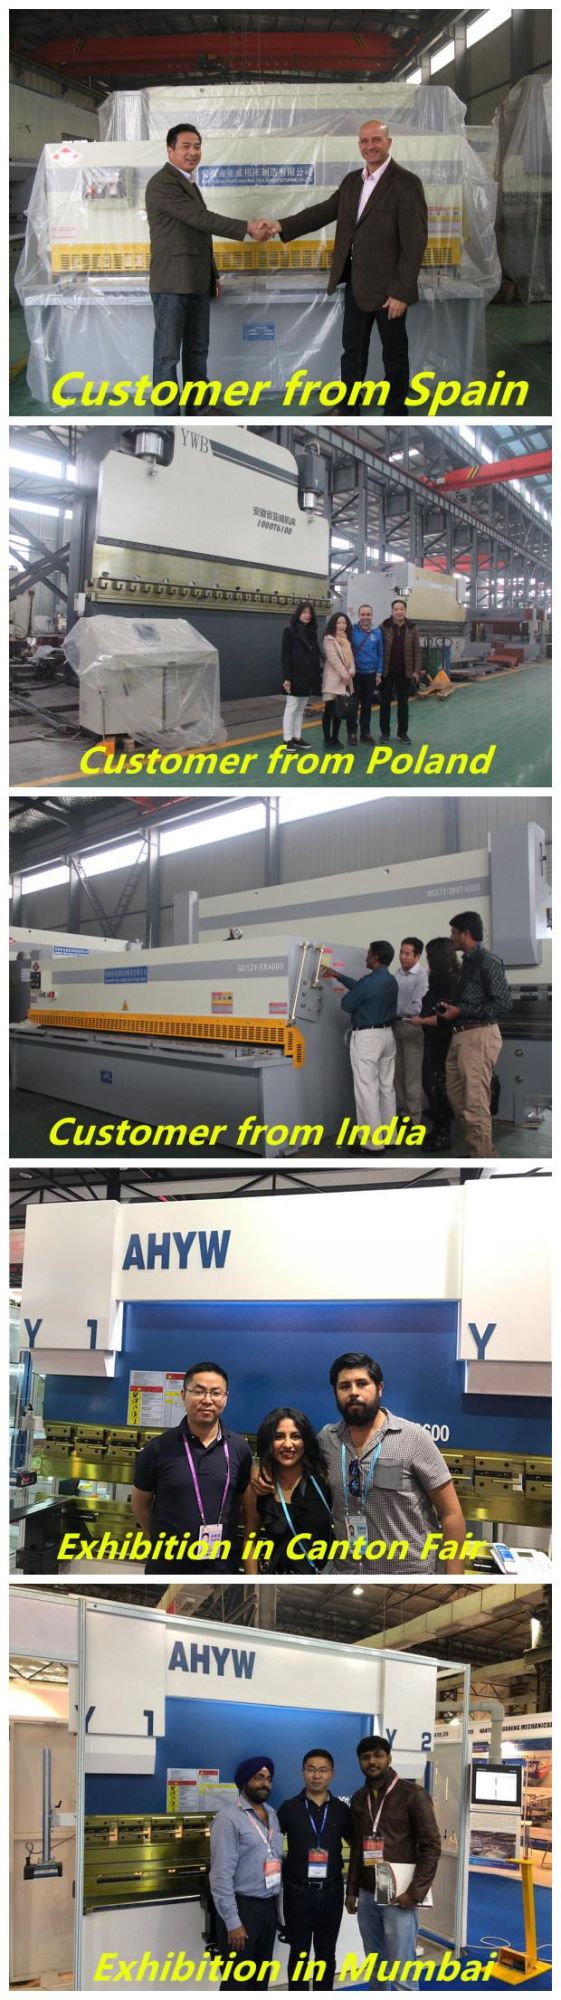 Engineering Guillotine Machine From Anhui Yawei with Ahyw Logo for Metal Sheet Cutting